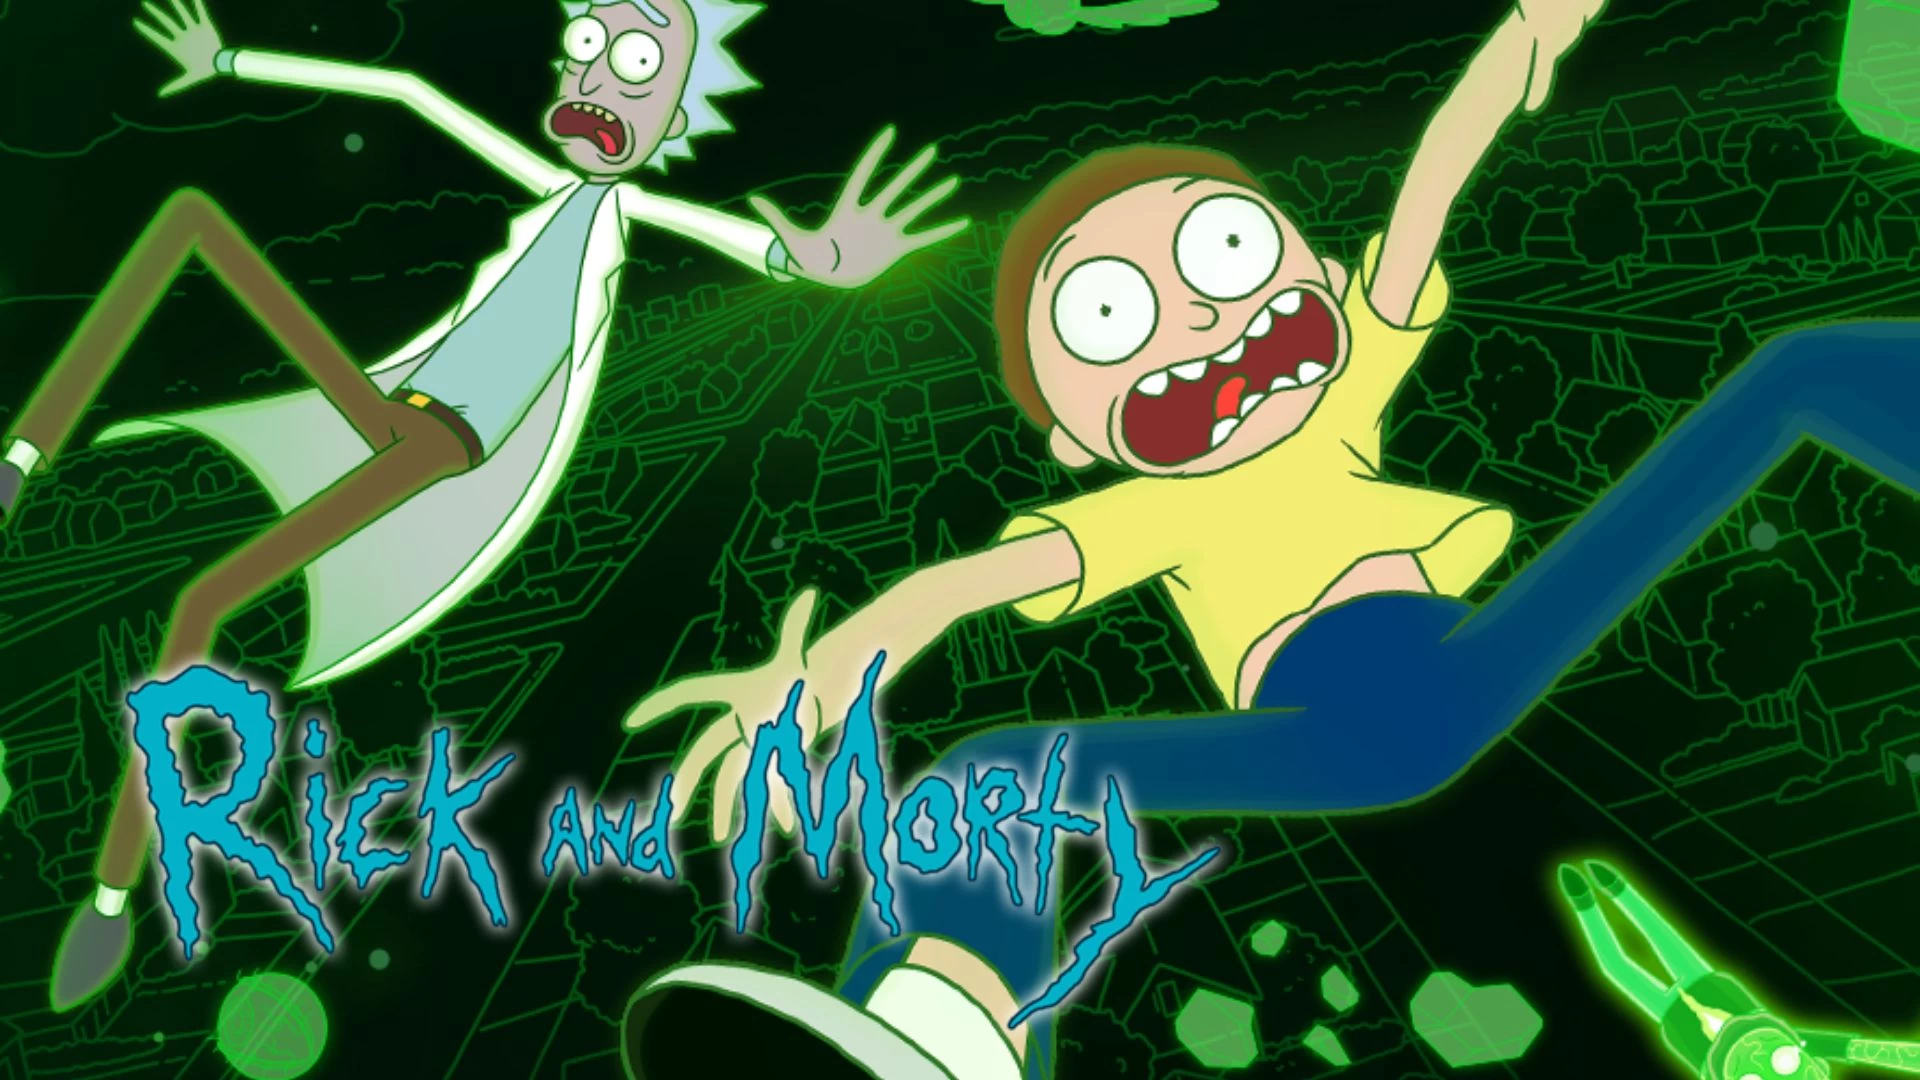 Rick and Morty Season 6 Ending Explained, Release Date, Plot, Summary, Where to Watch, and More